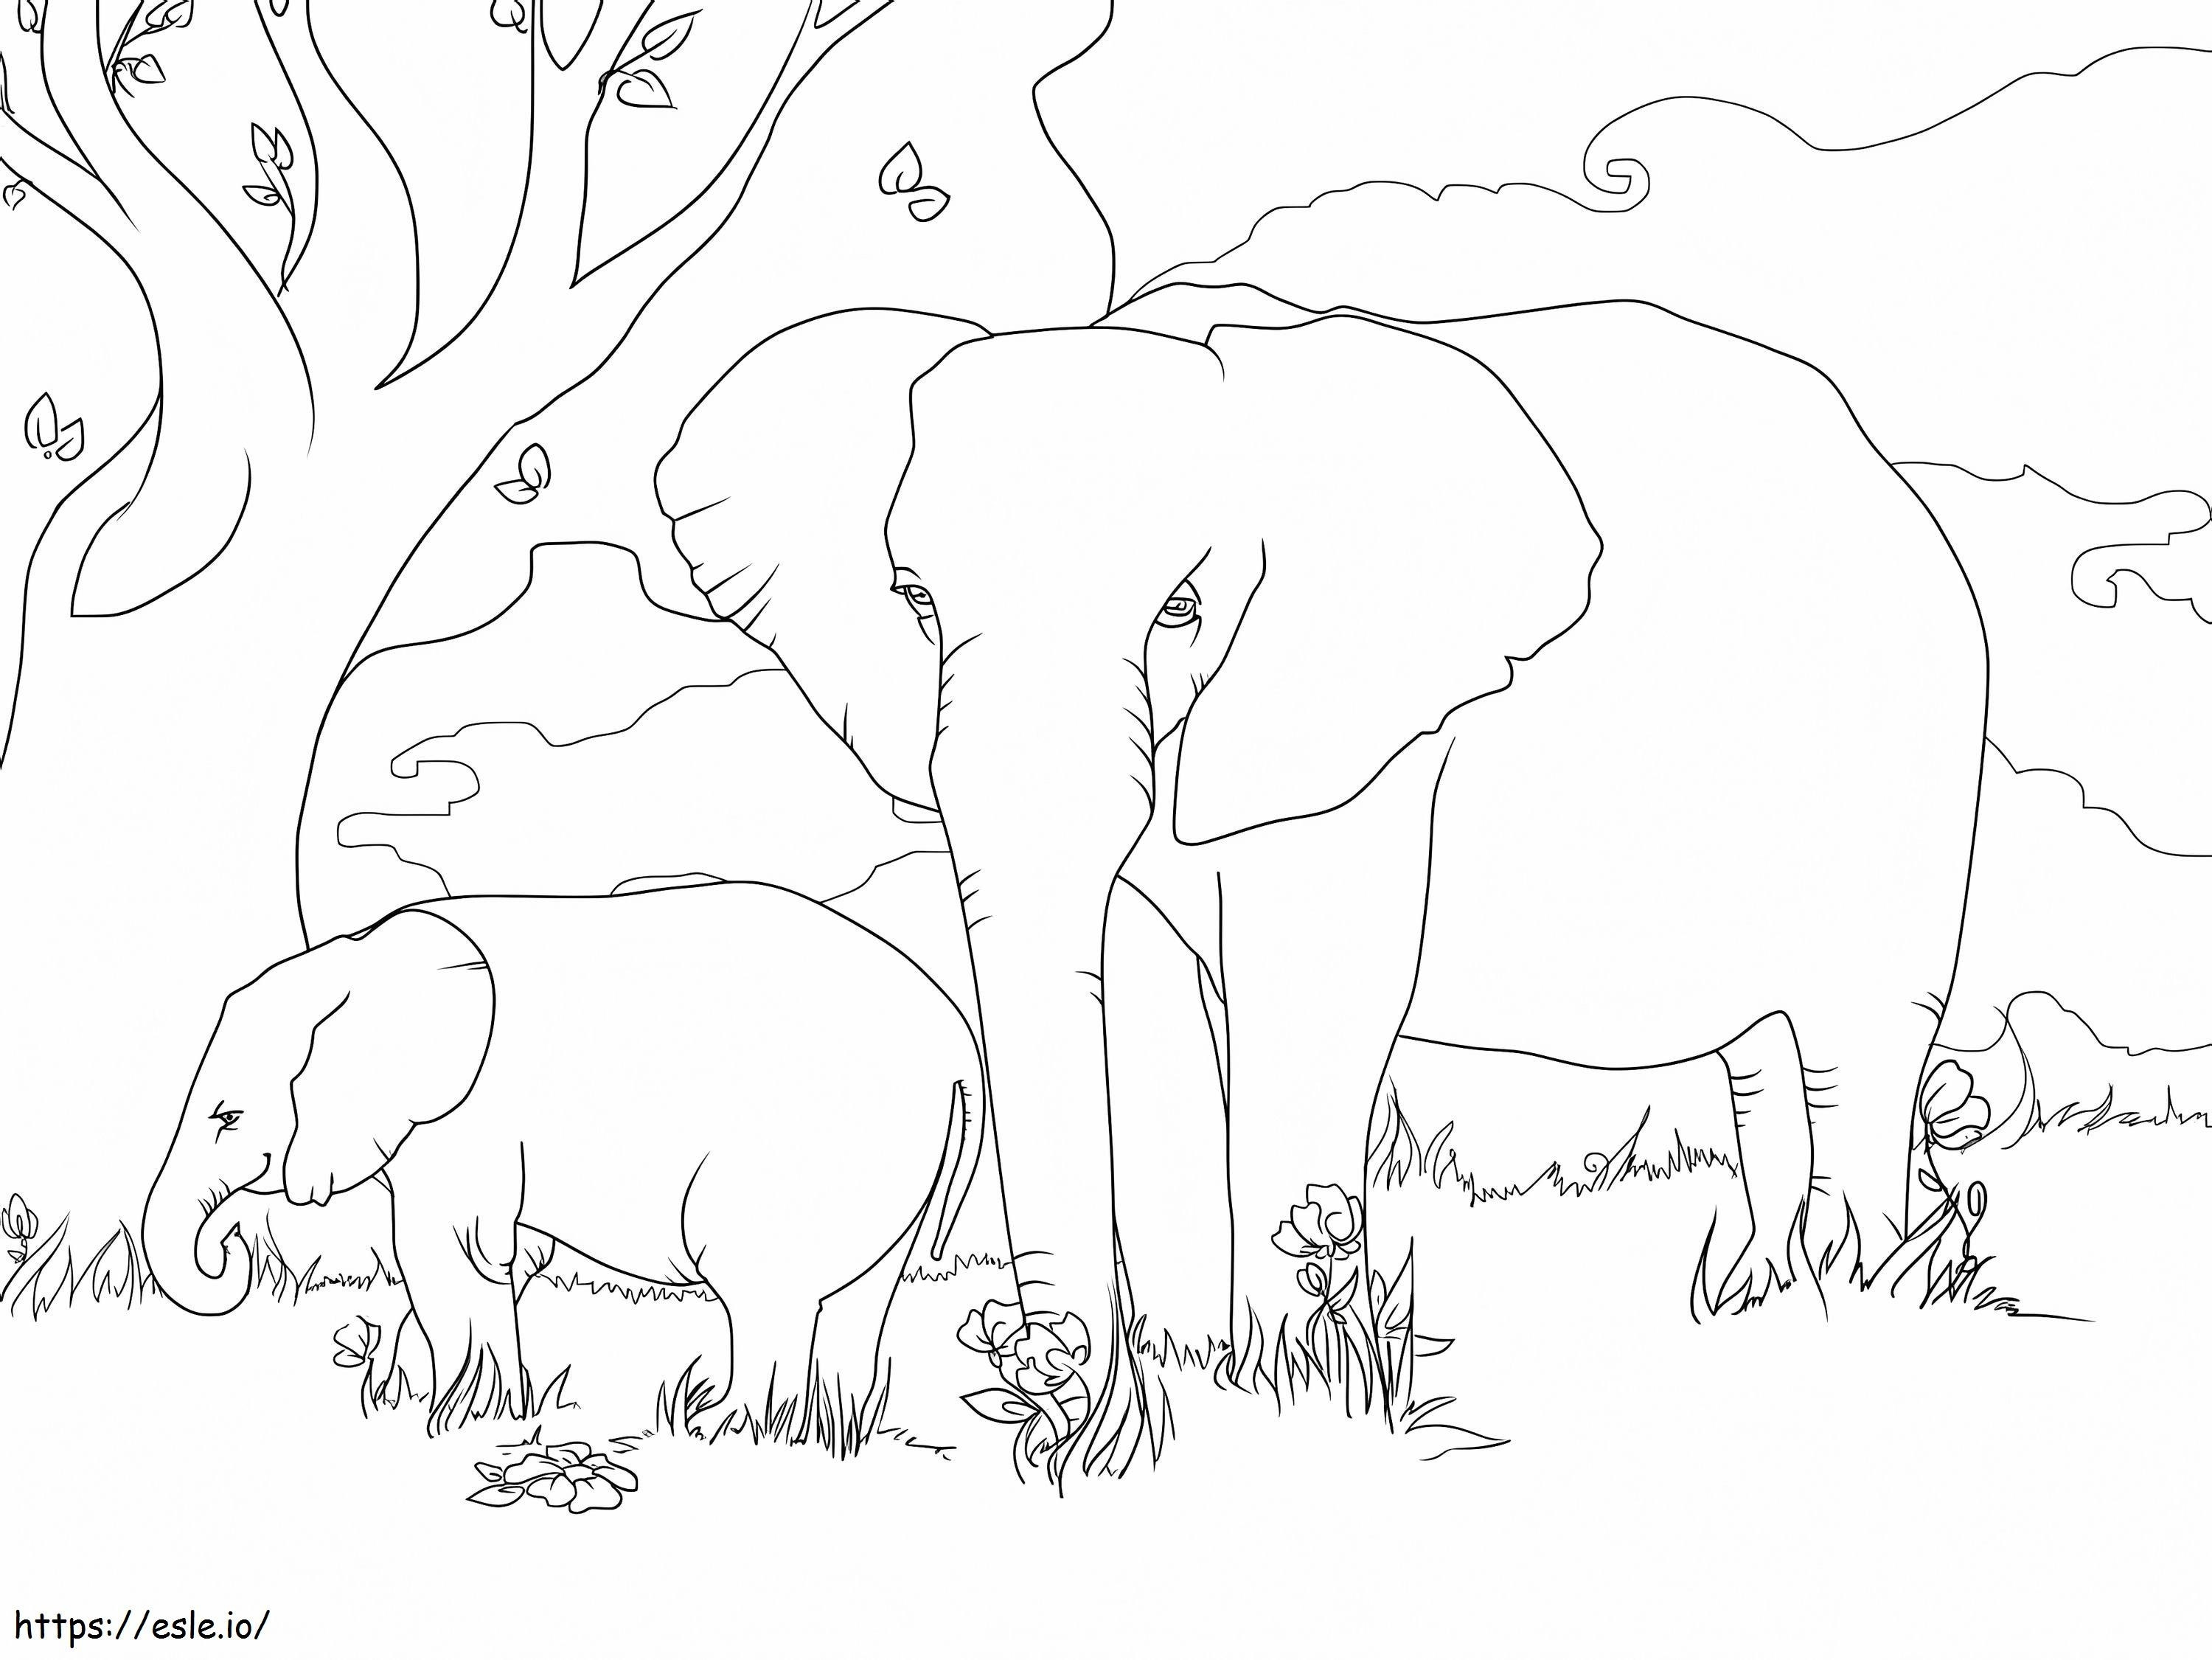 African Bush Elephants coloring page